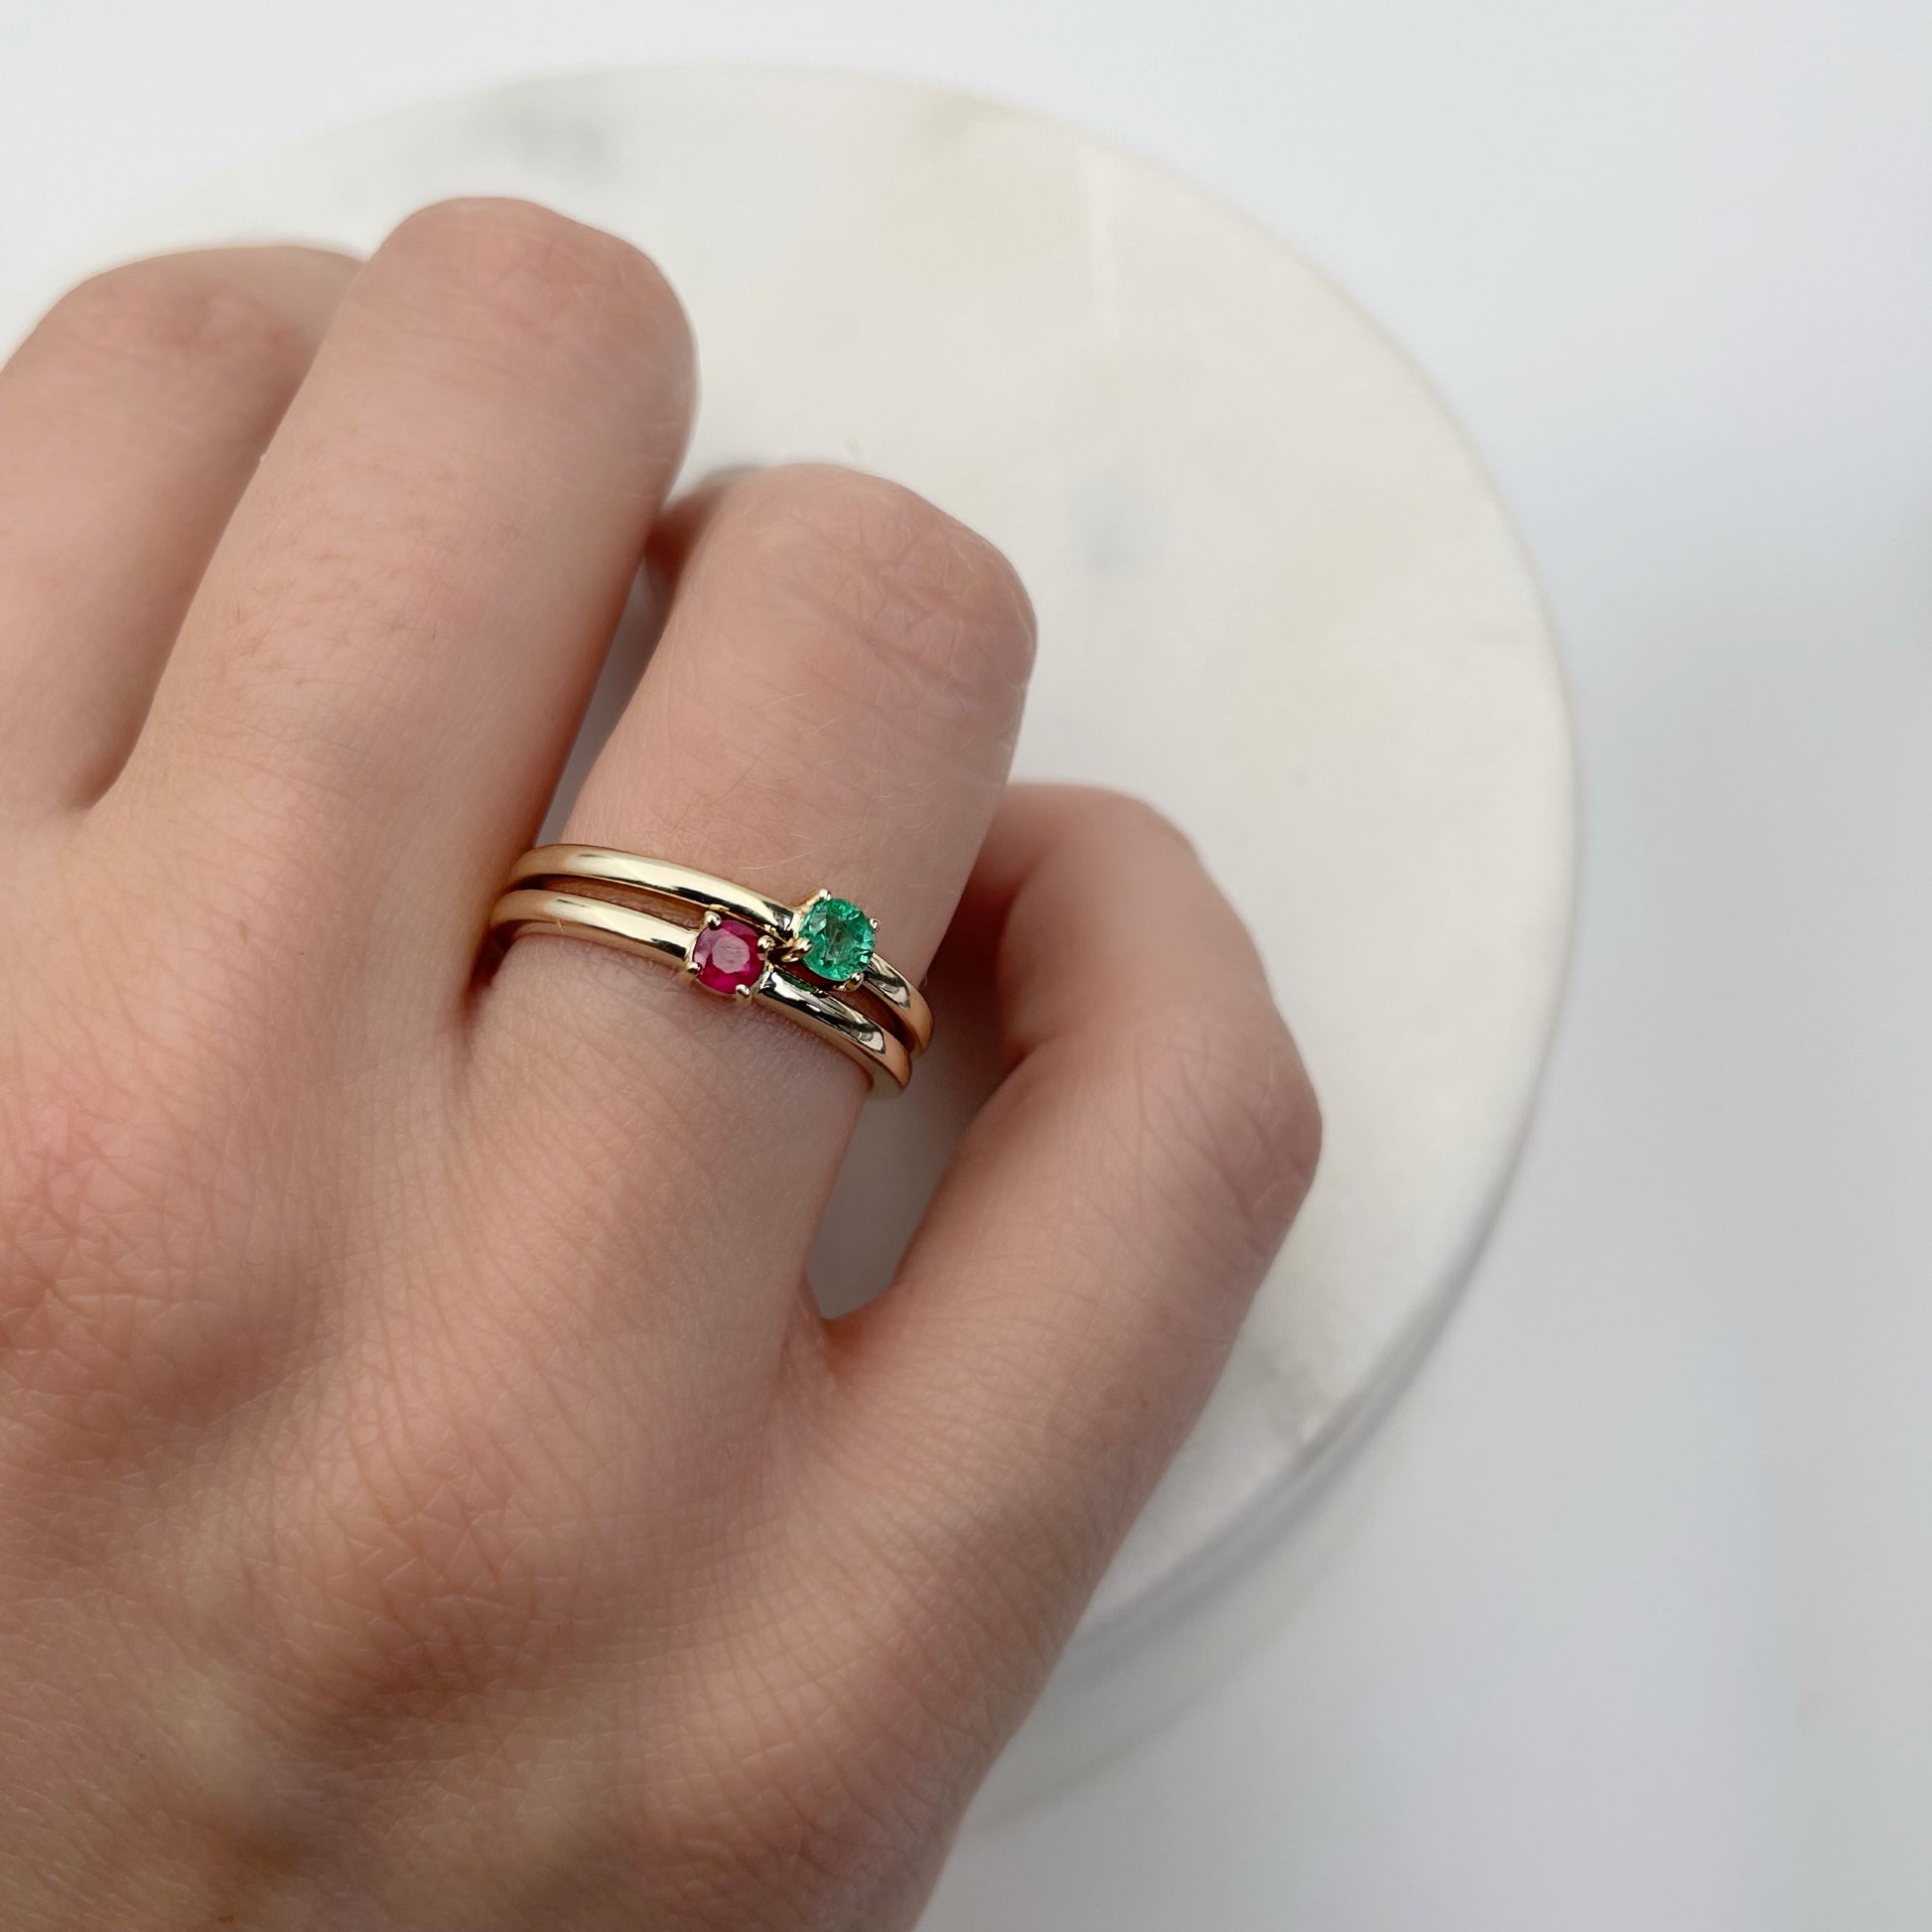 9ct gold stacking rings with ruby and emerald gemstone